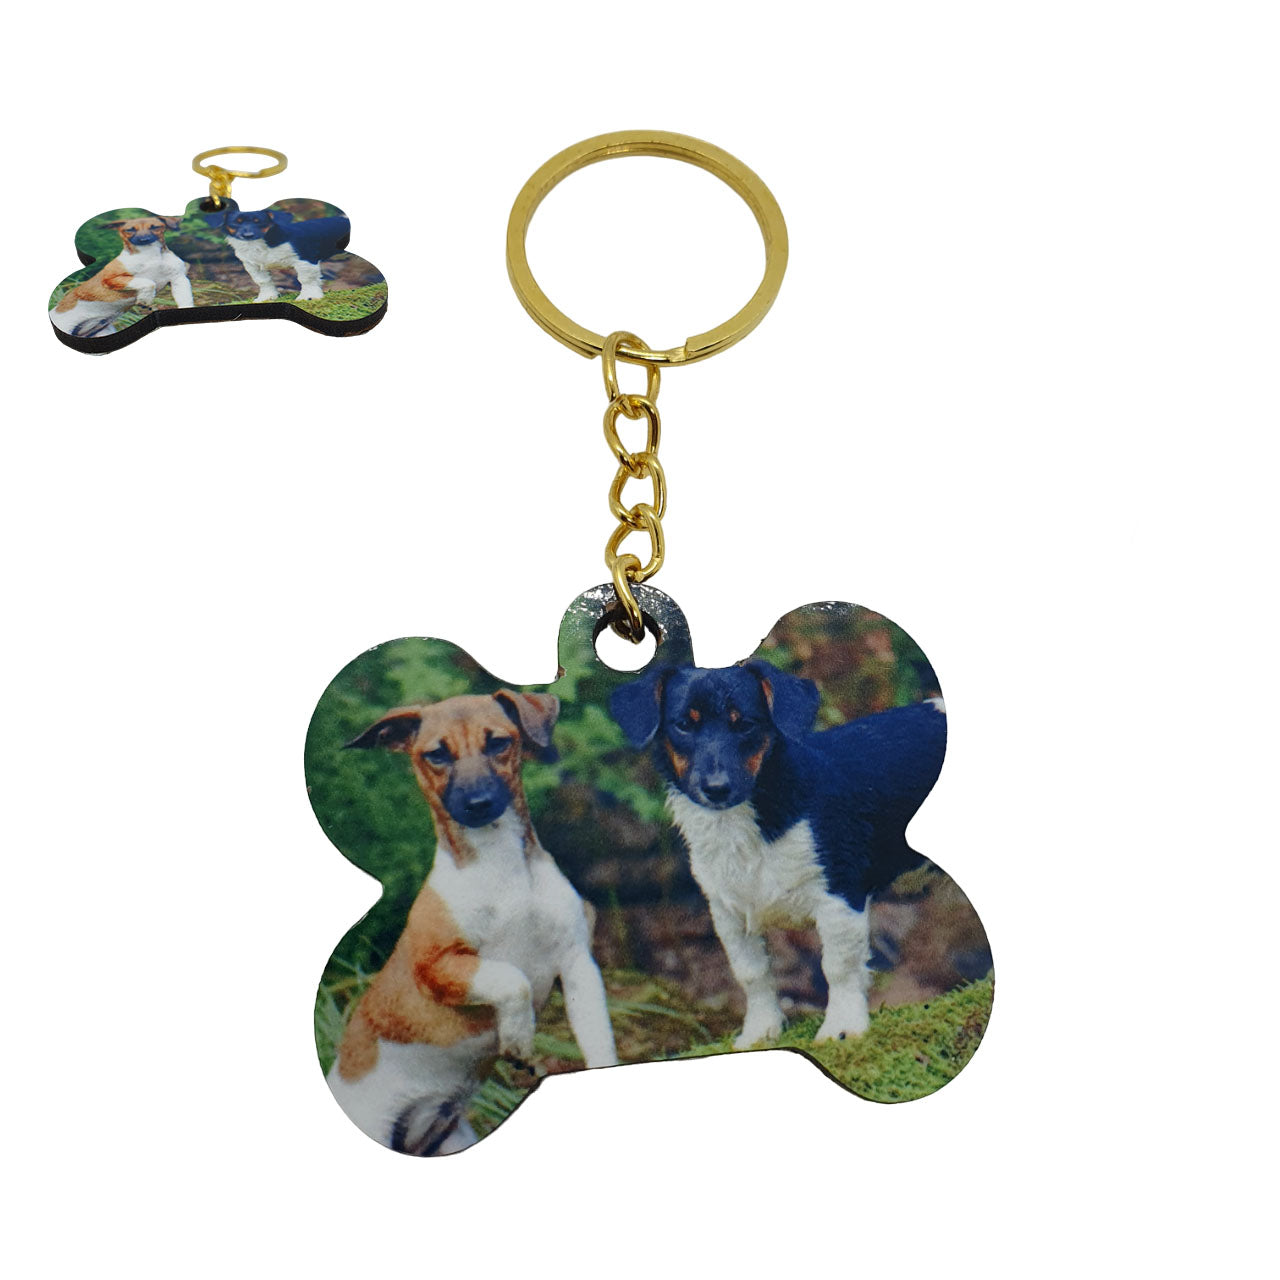 printed pet keyring, double sided with same image on reverse